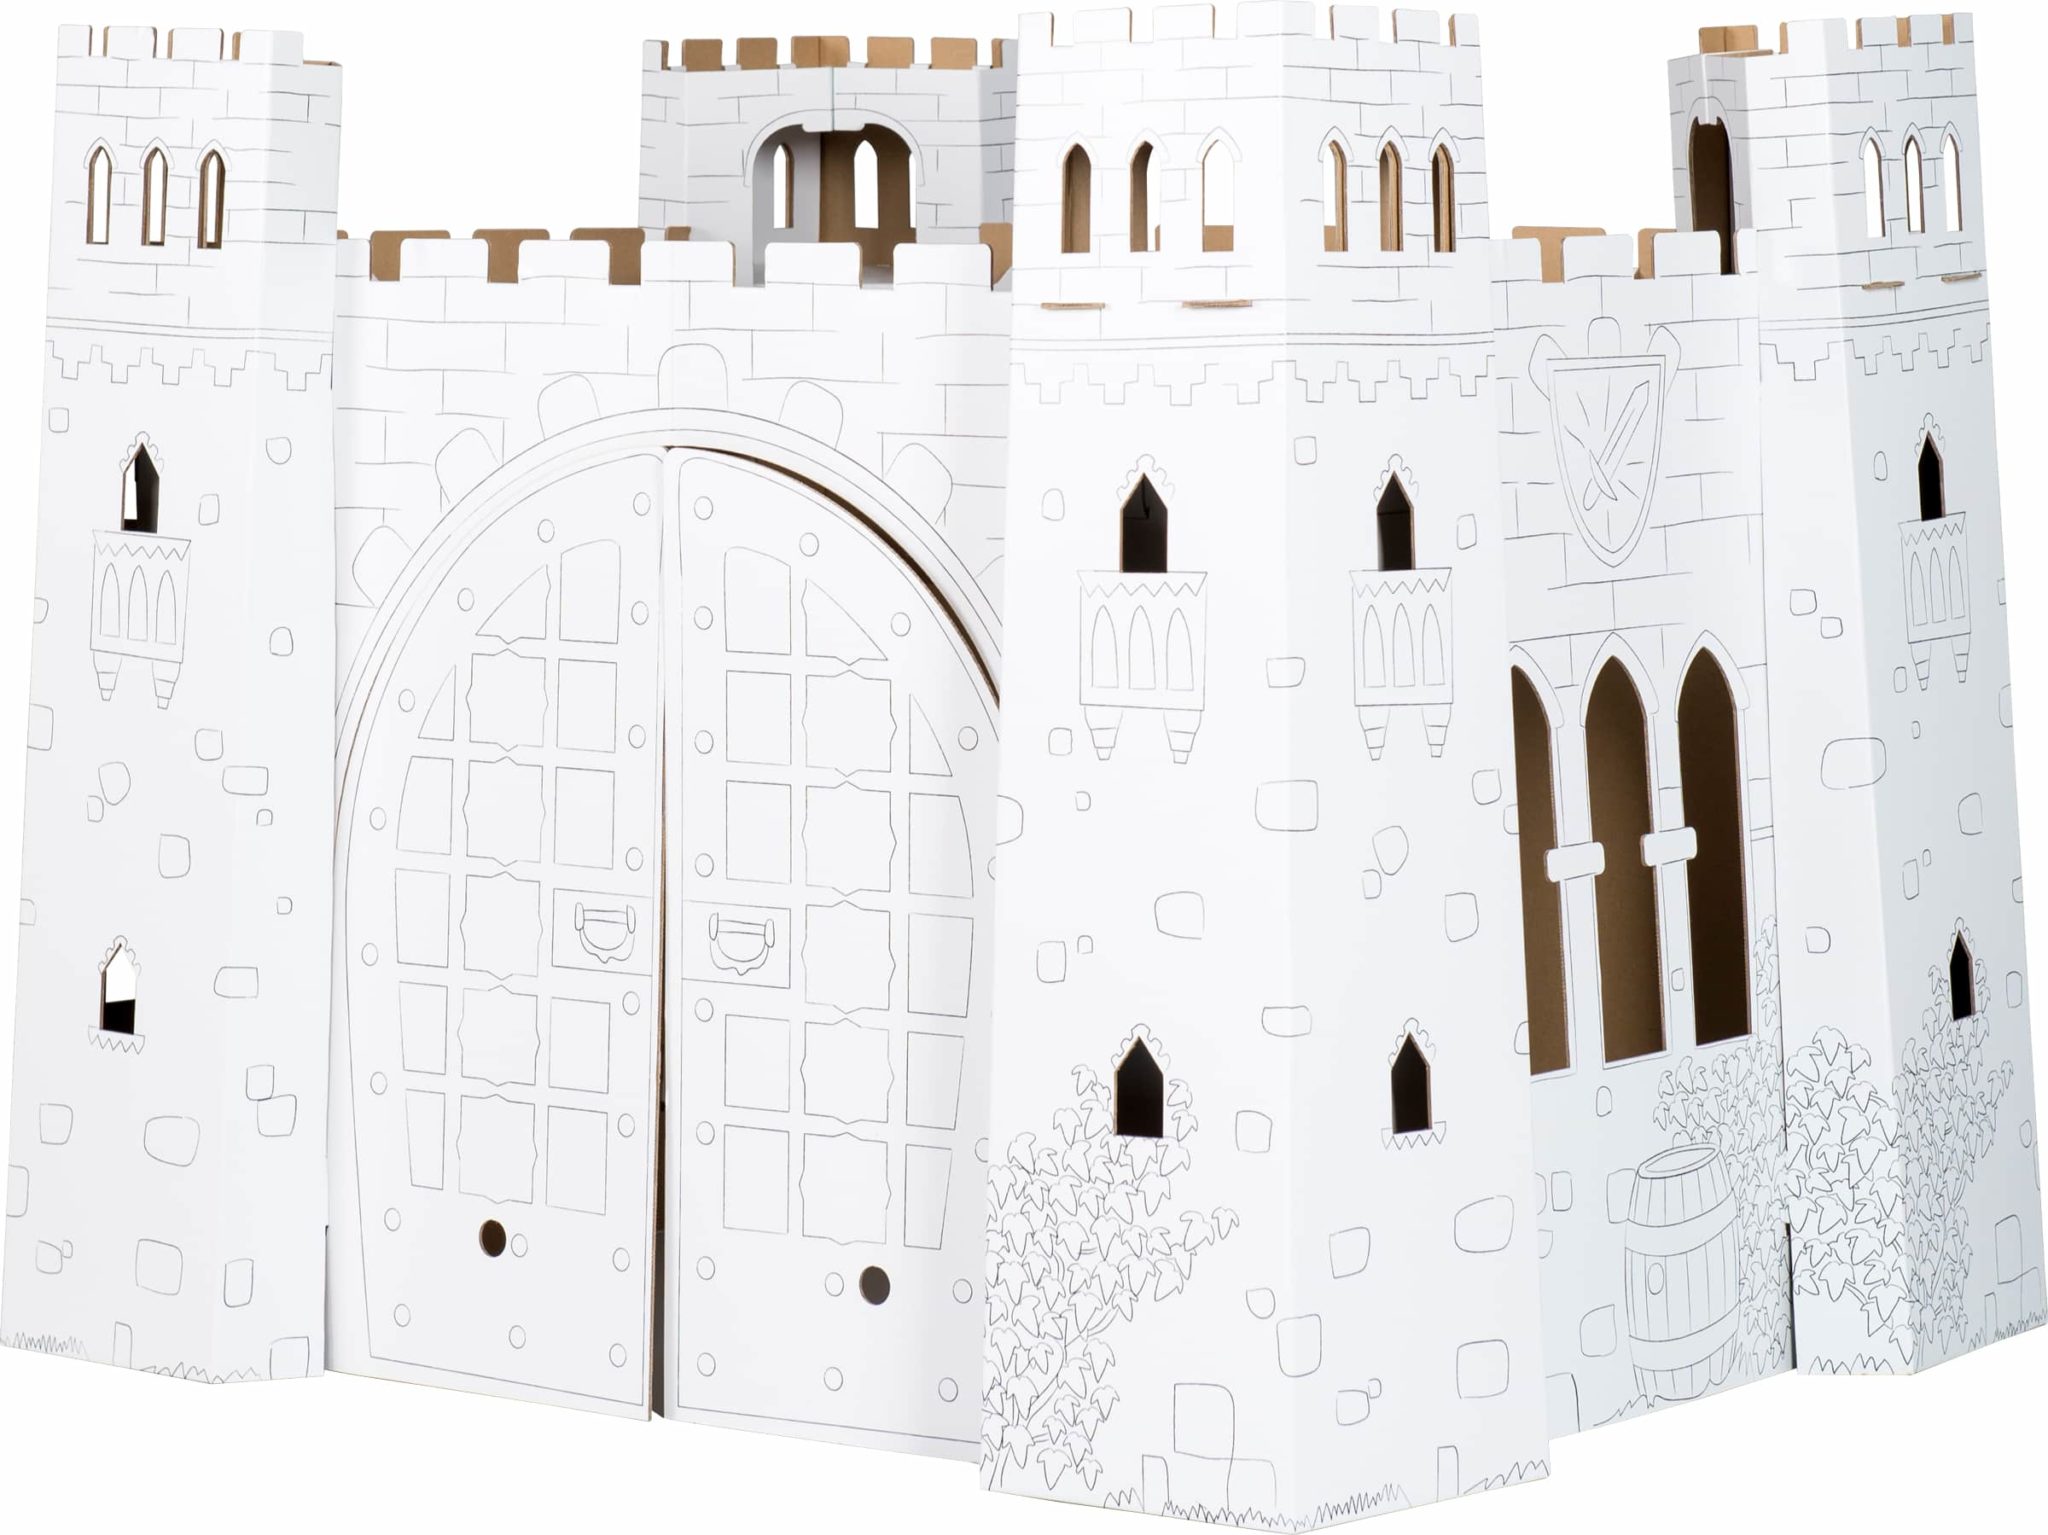 Cardboard Castle built and uncoloured